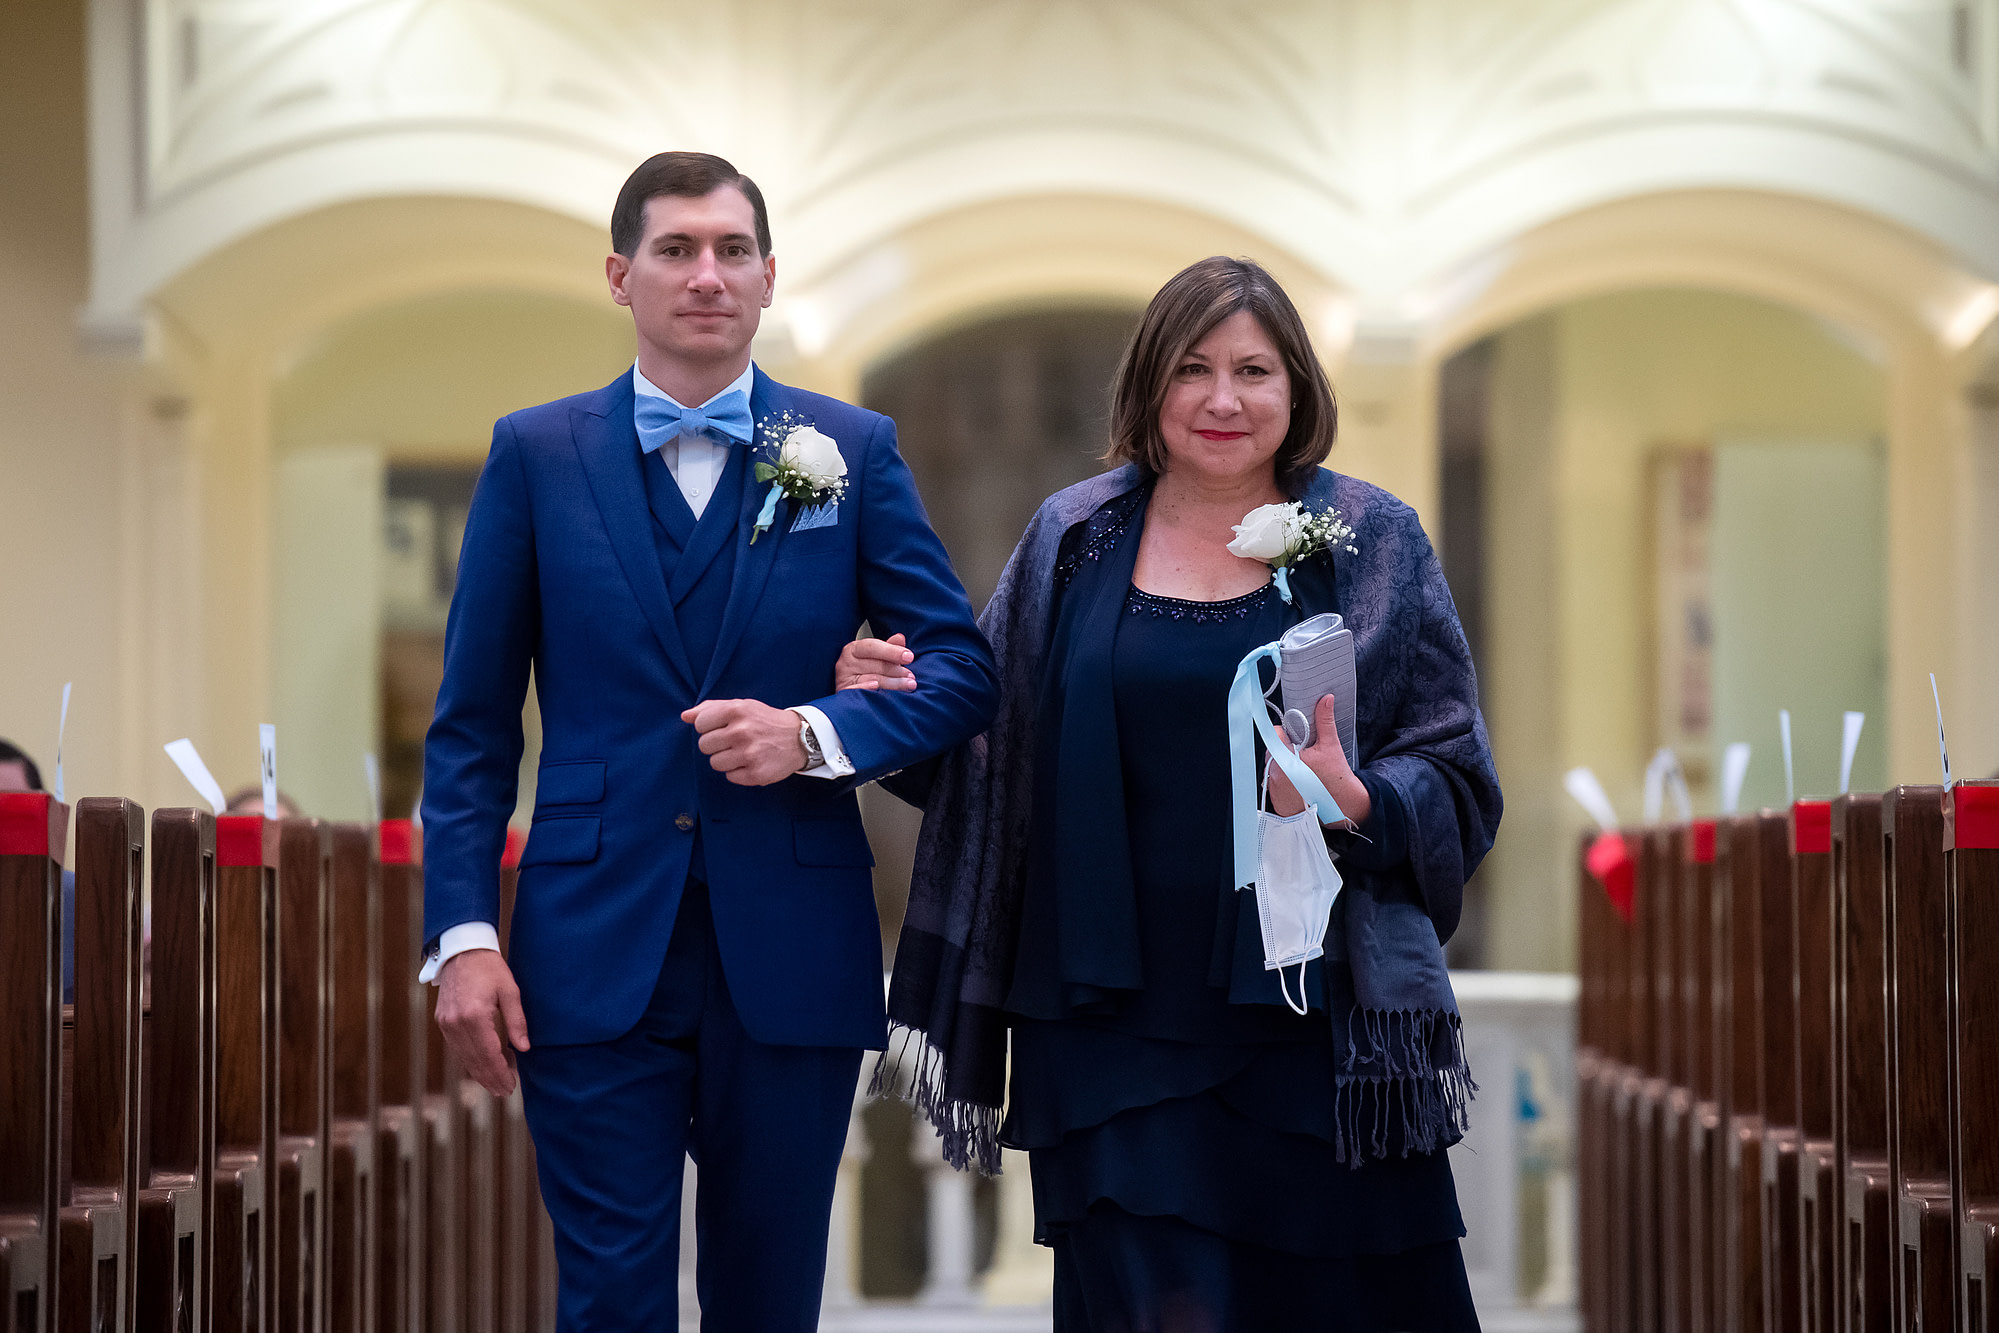 Groom processes in with his mother at his wedding at the Cathedral Basilica of the Immaculate Conception in Denver, Colorado.